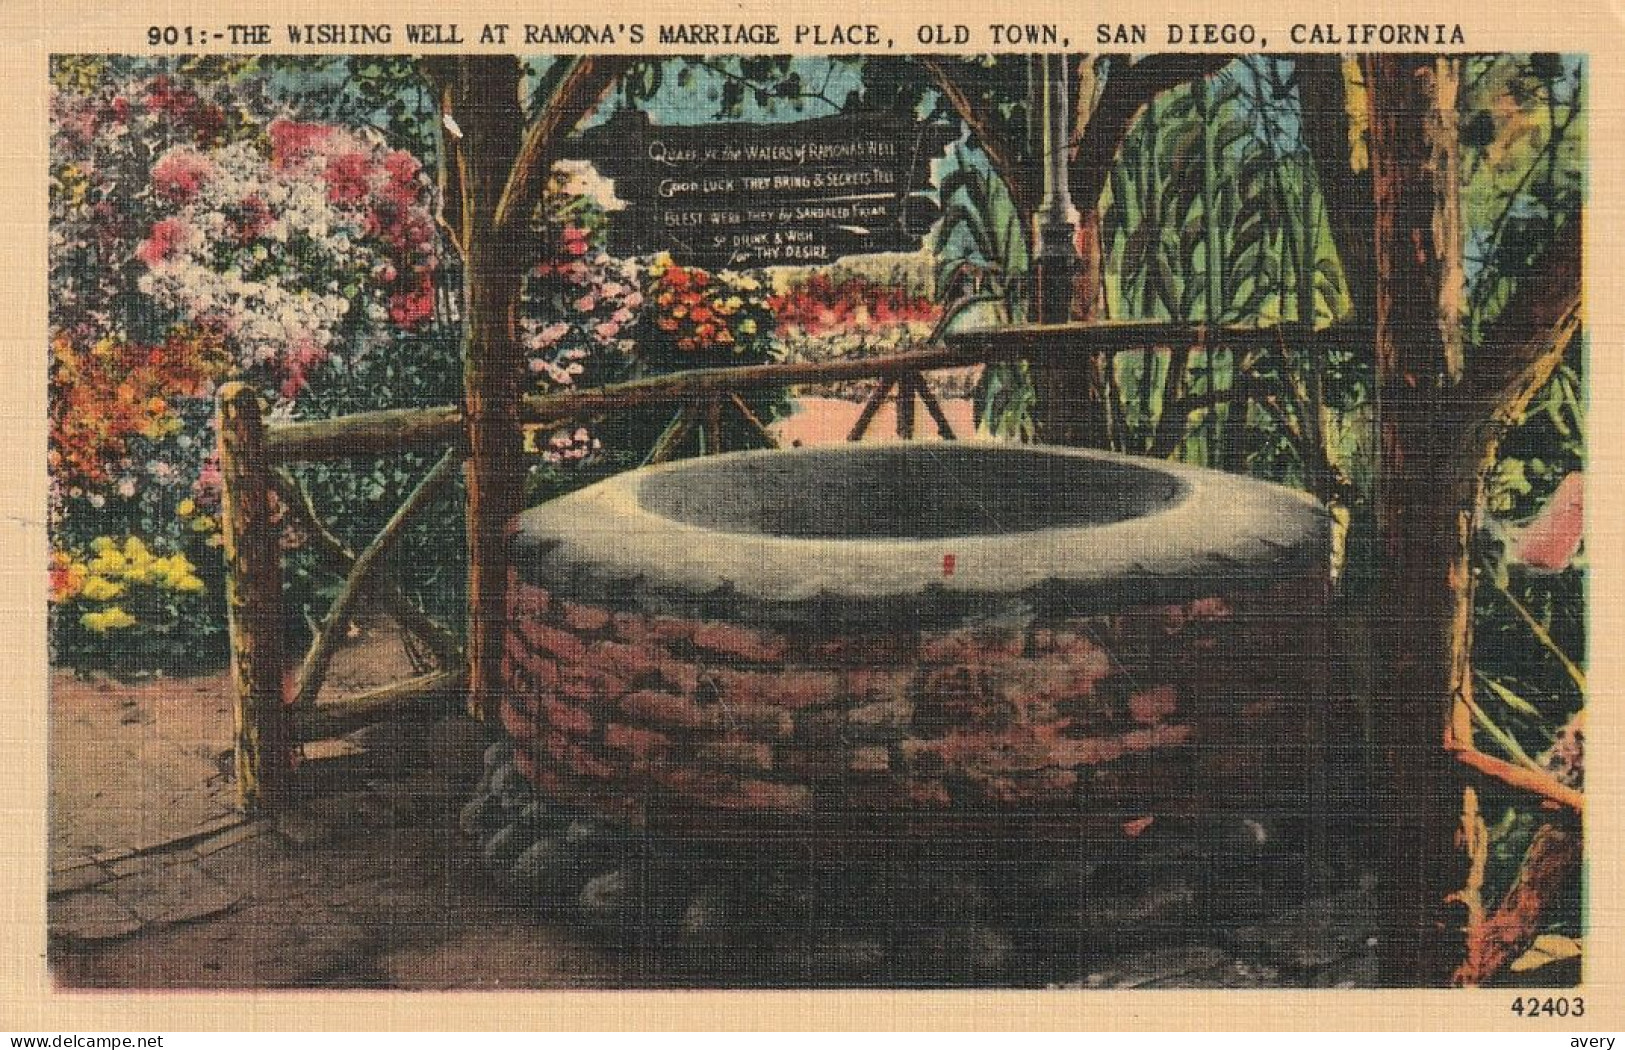 The Wishing Well At Ramona's Marriage Place, Old Town, San Diego, California - San Diego